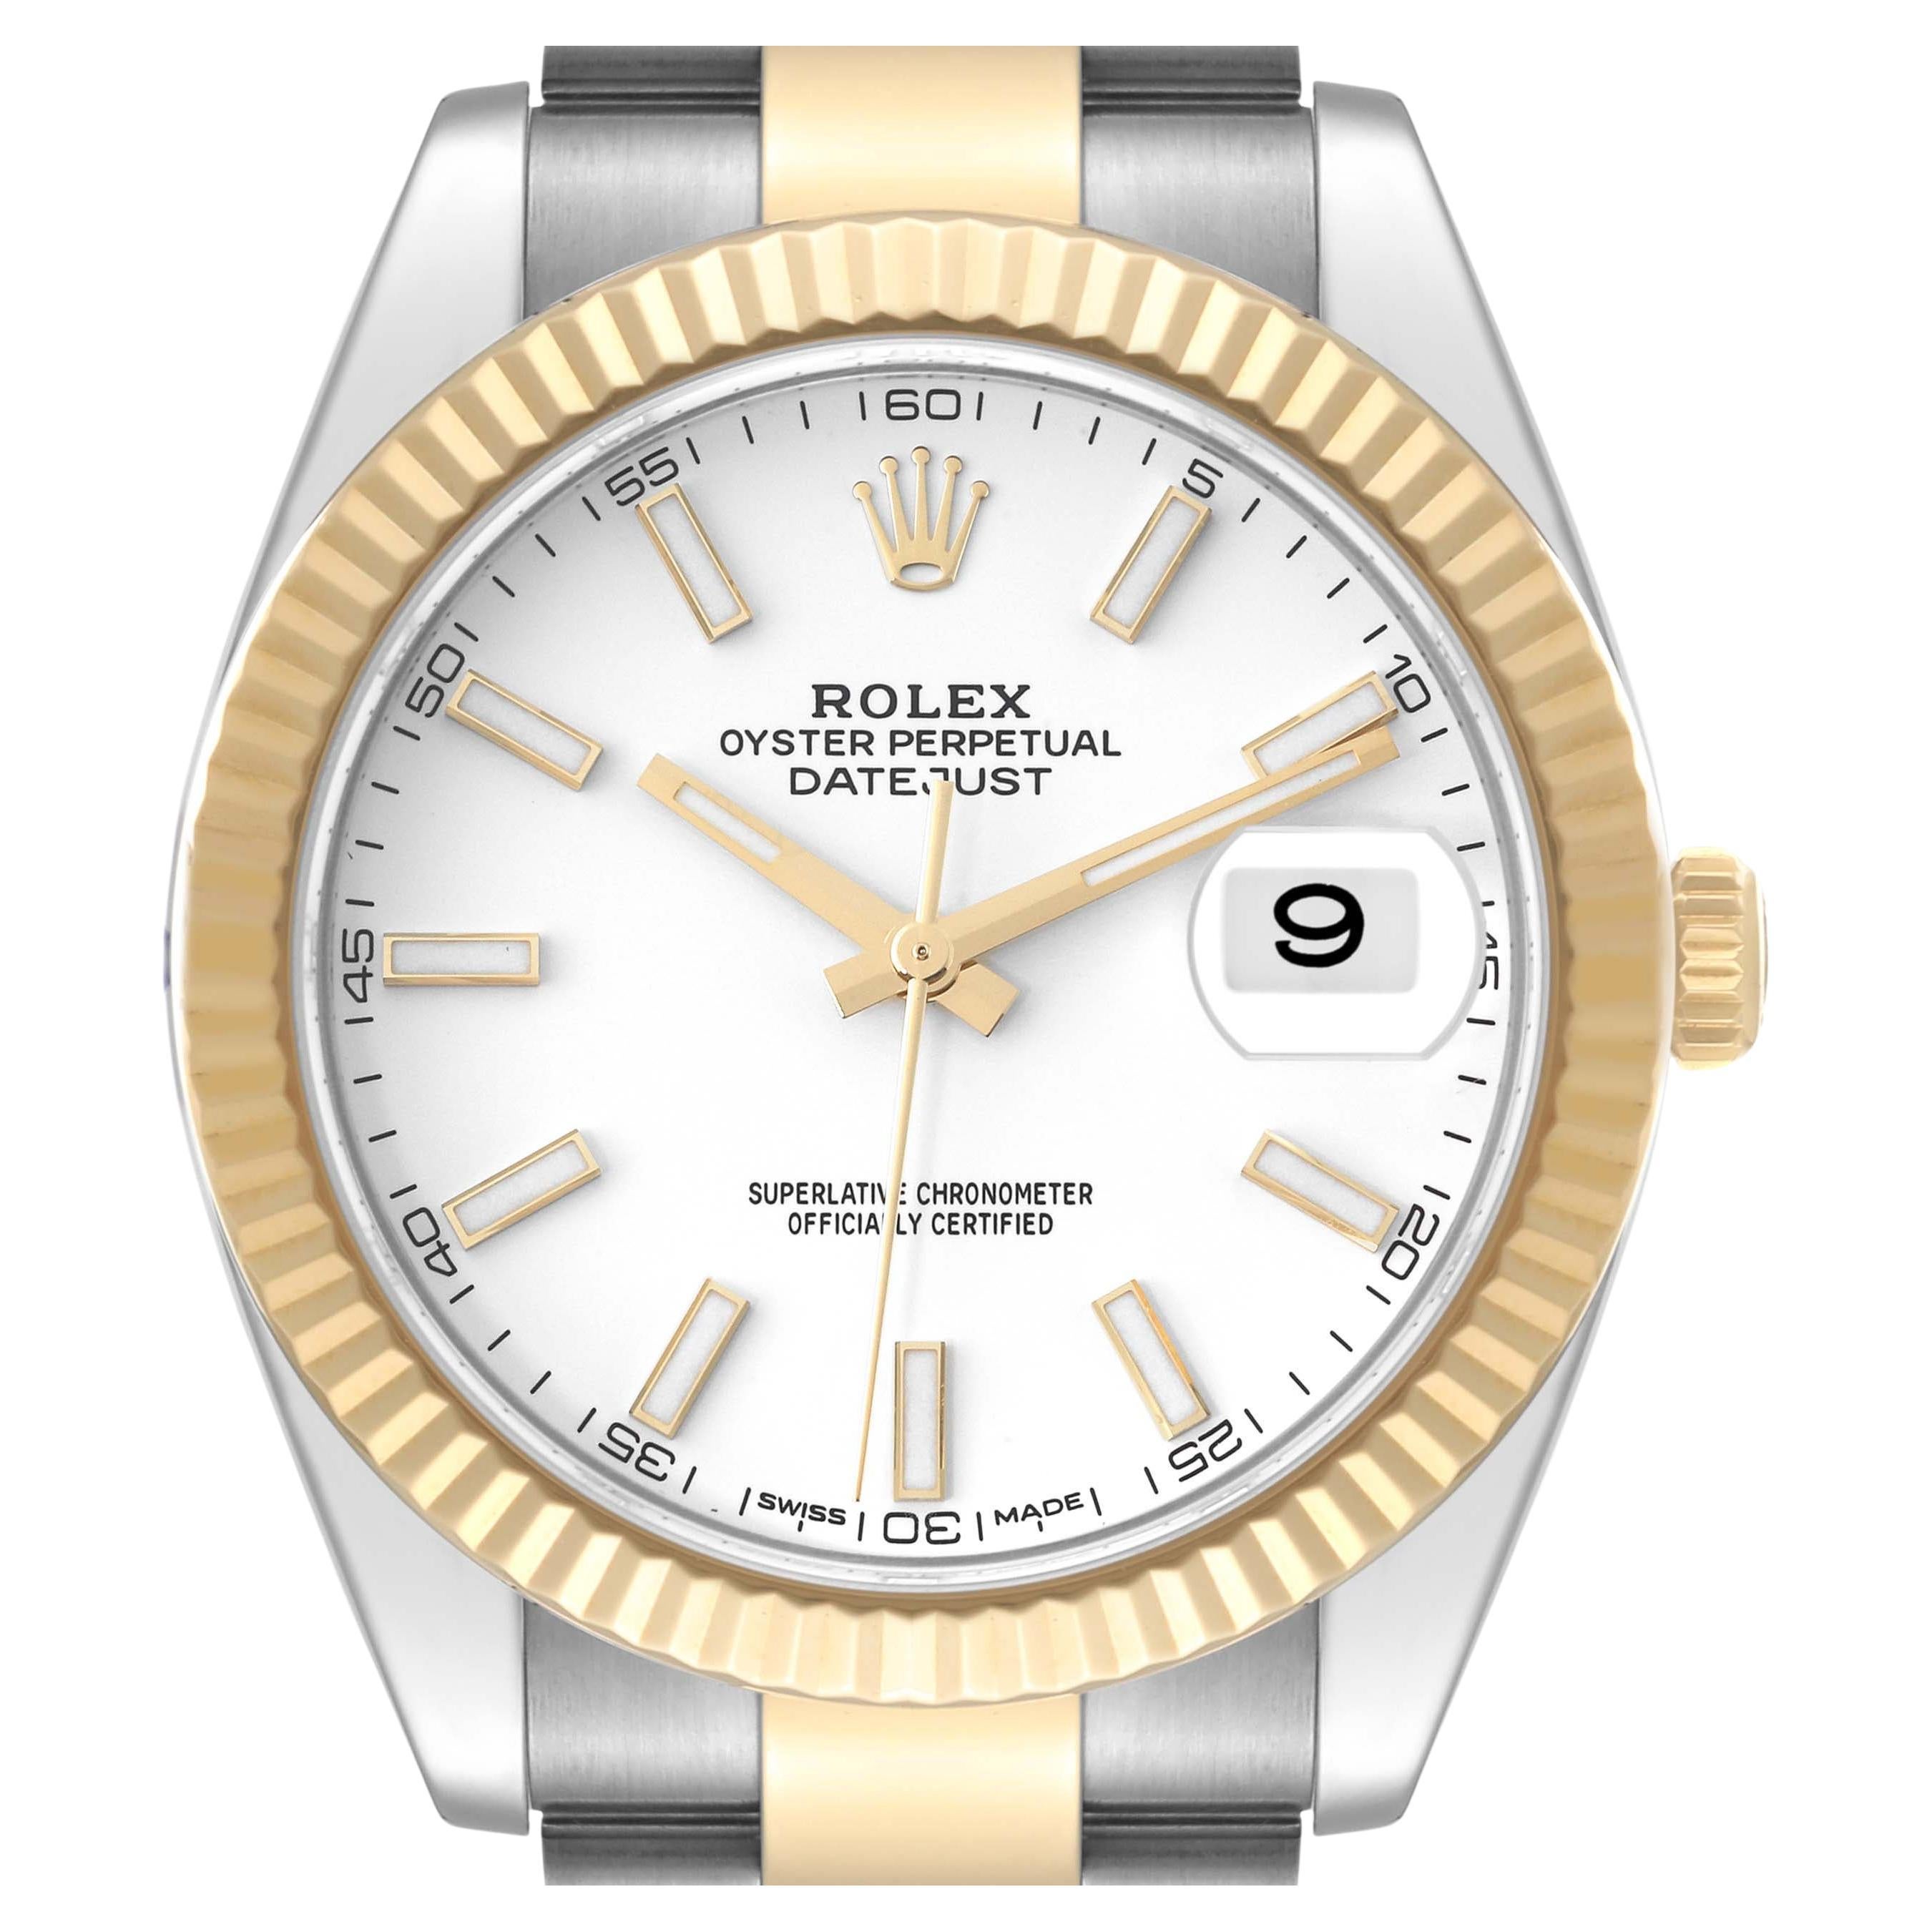 Rolex Datejust 41 Steel Yellow Gold White Dial Mens Watch 126333 Box Card For Sale